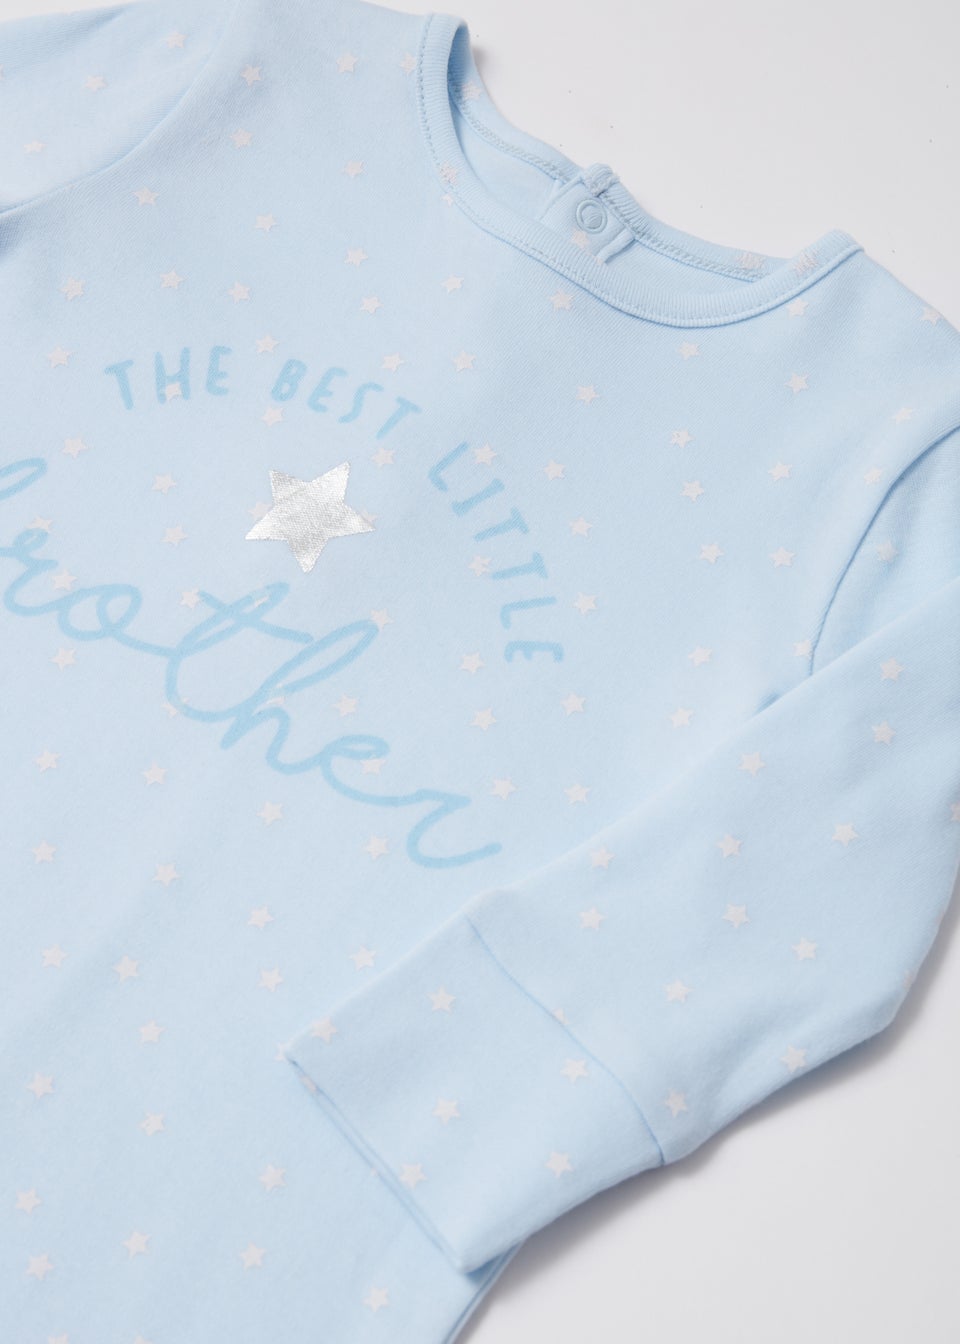 Baby Blue Little Brother Sleepsuit (Tiny Baby-18mths)